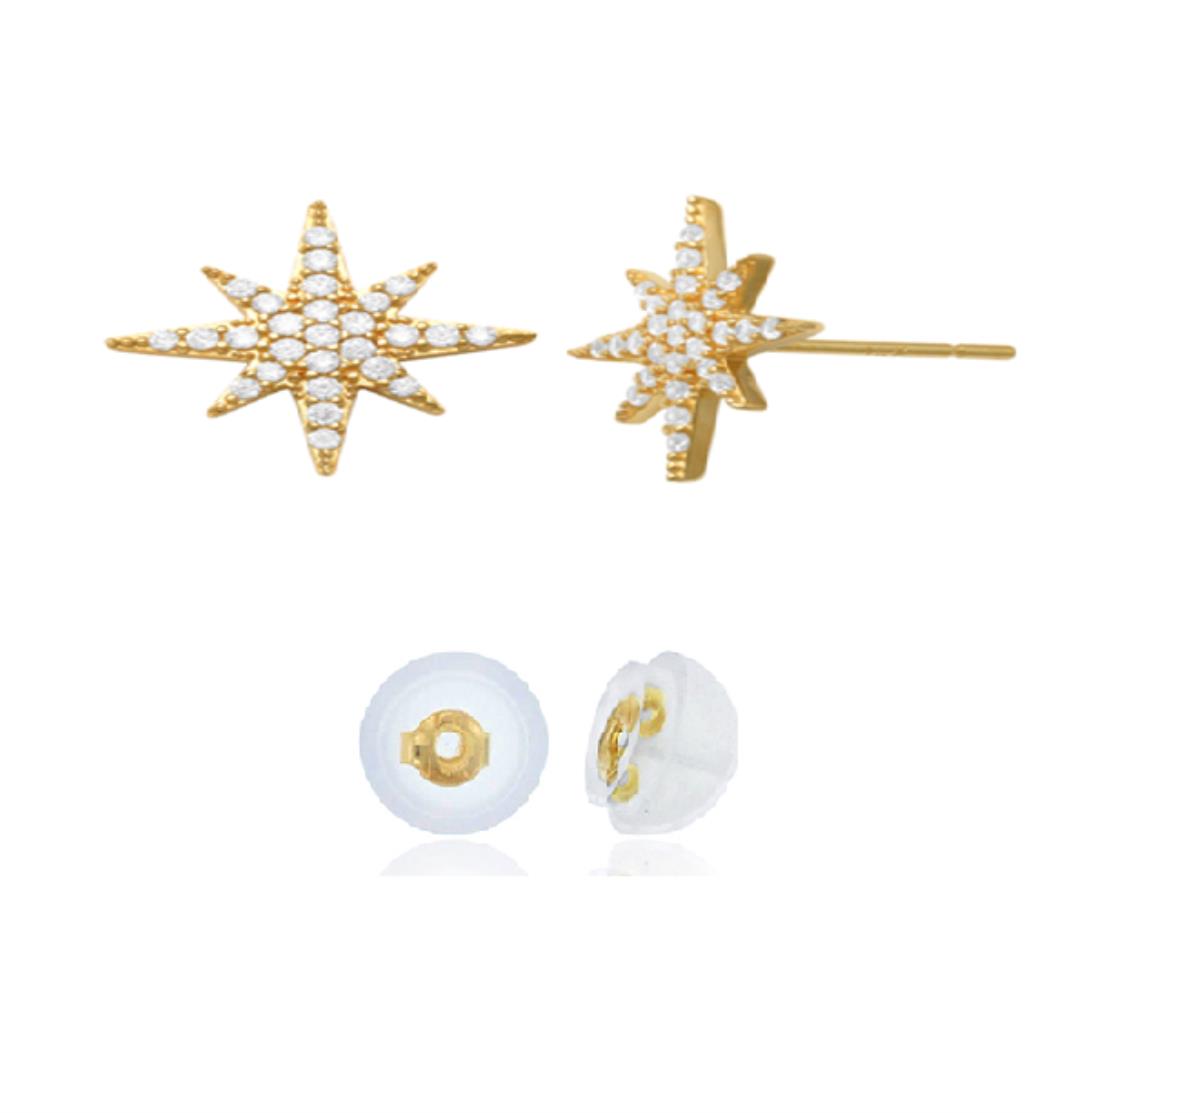 10K Yellow Gold 12x12mm Micropave Starburst Stud Earring with Silicone Back